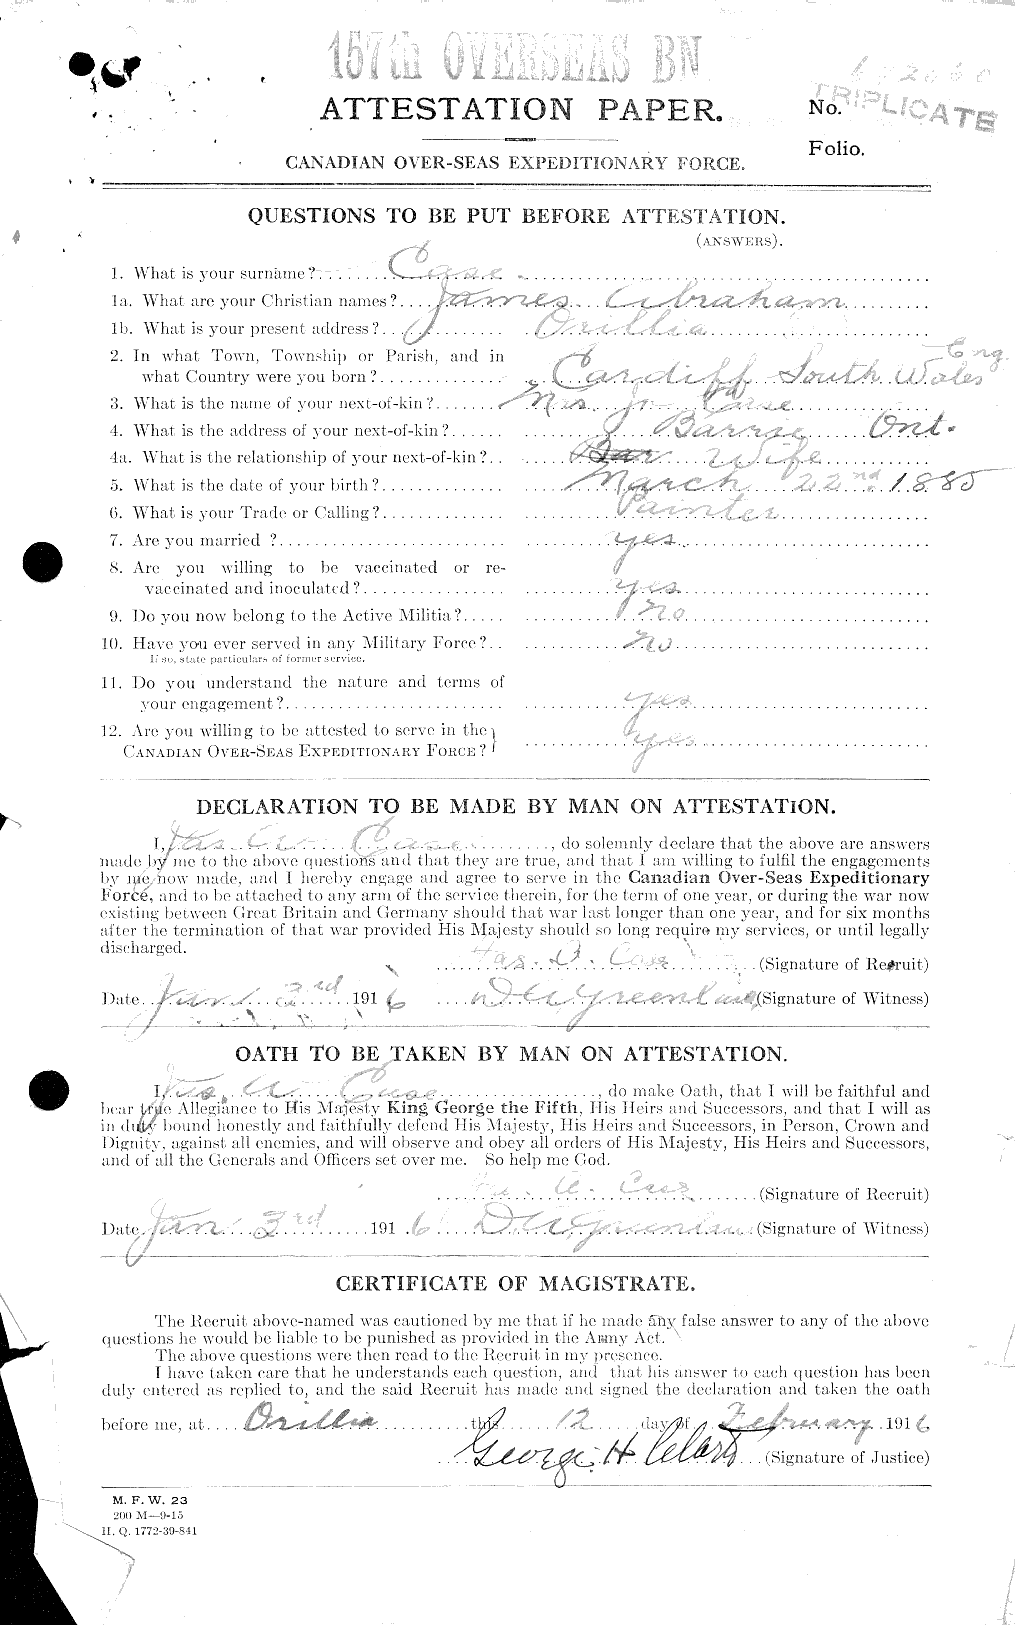 Personnel Records of the First World War - CEF 012714a